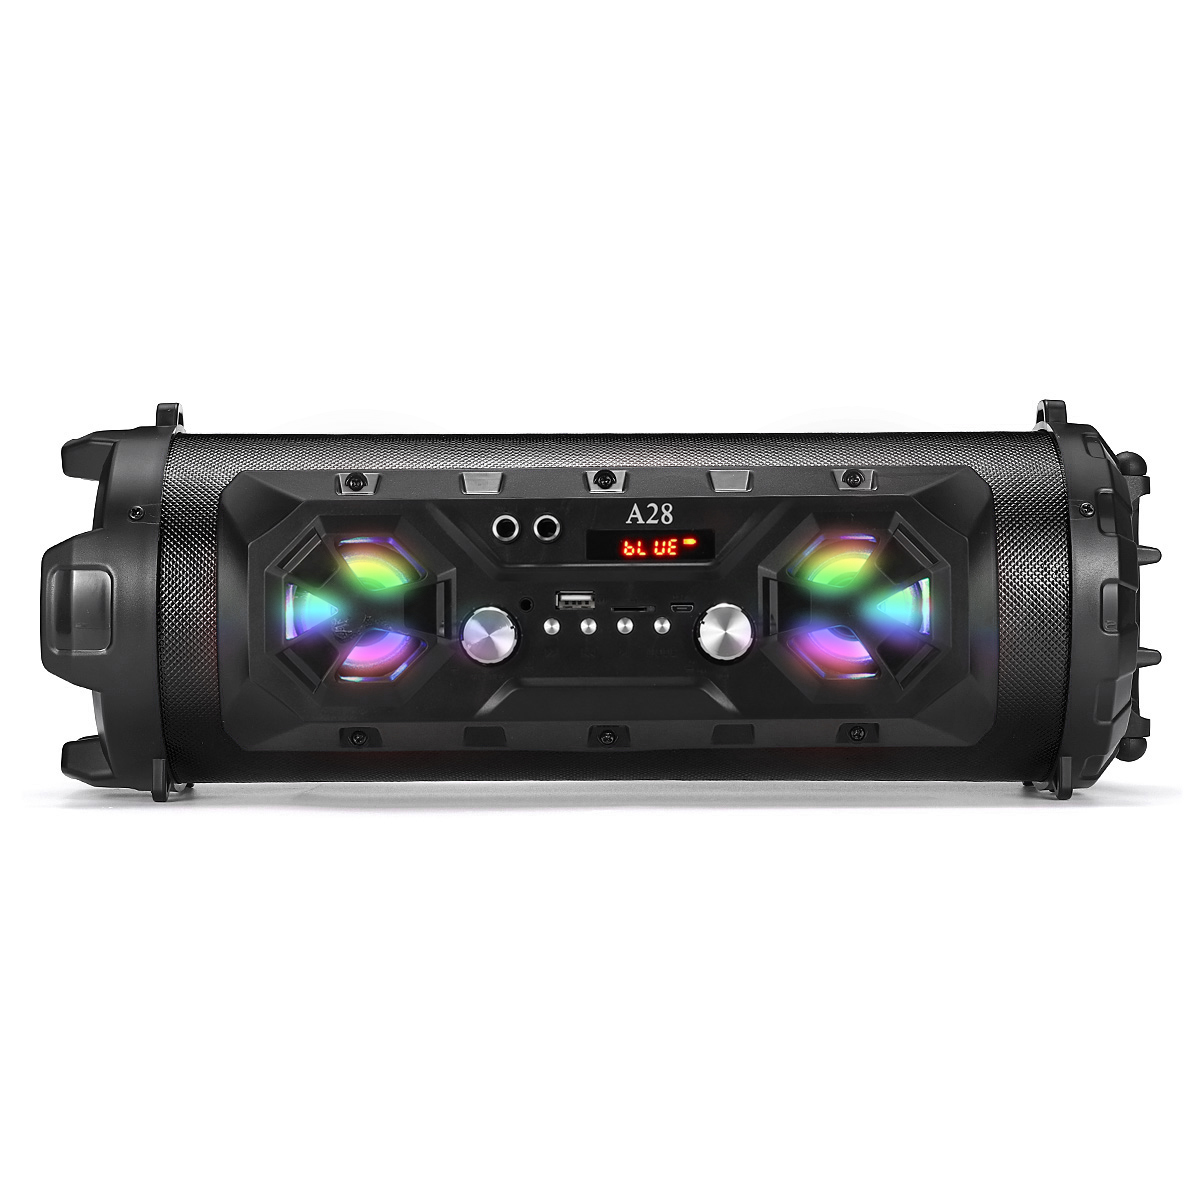 Unique Portable LED Wireless Portable bluetooth 4.2 Speaker Stereo Sound Super Bass HIFI AUX FM Subwoofer Loudspeaker ,RGB Colorful Lights, EQ, Booming Bass, Outdoor Speaker for Home, Party, Camping - image 5 of 9